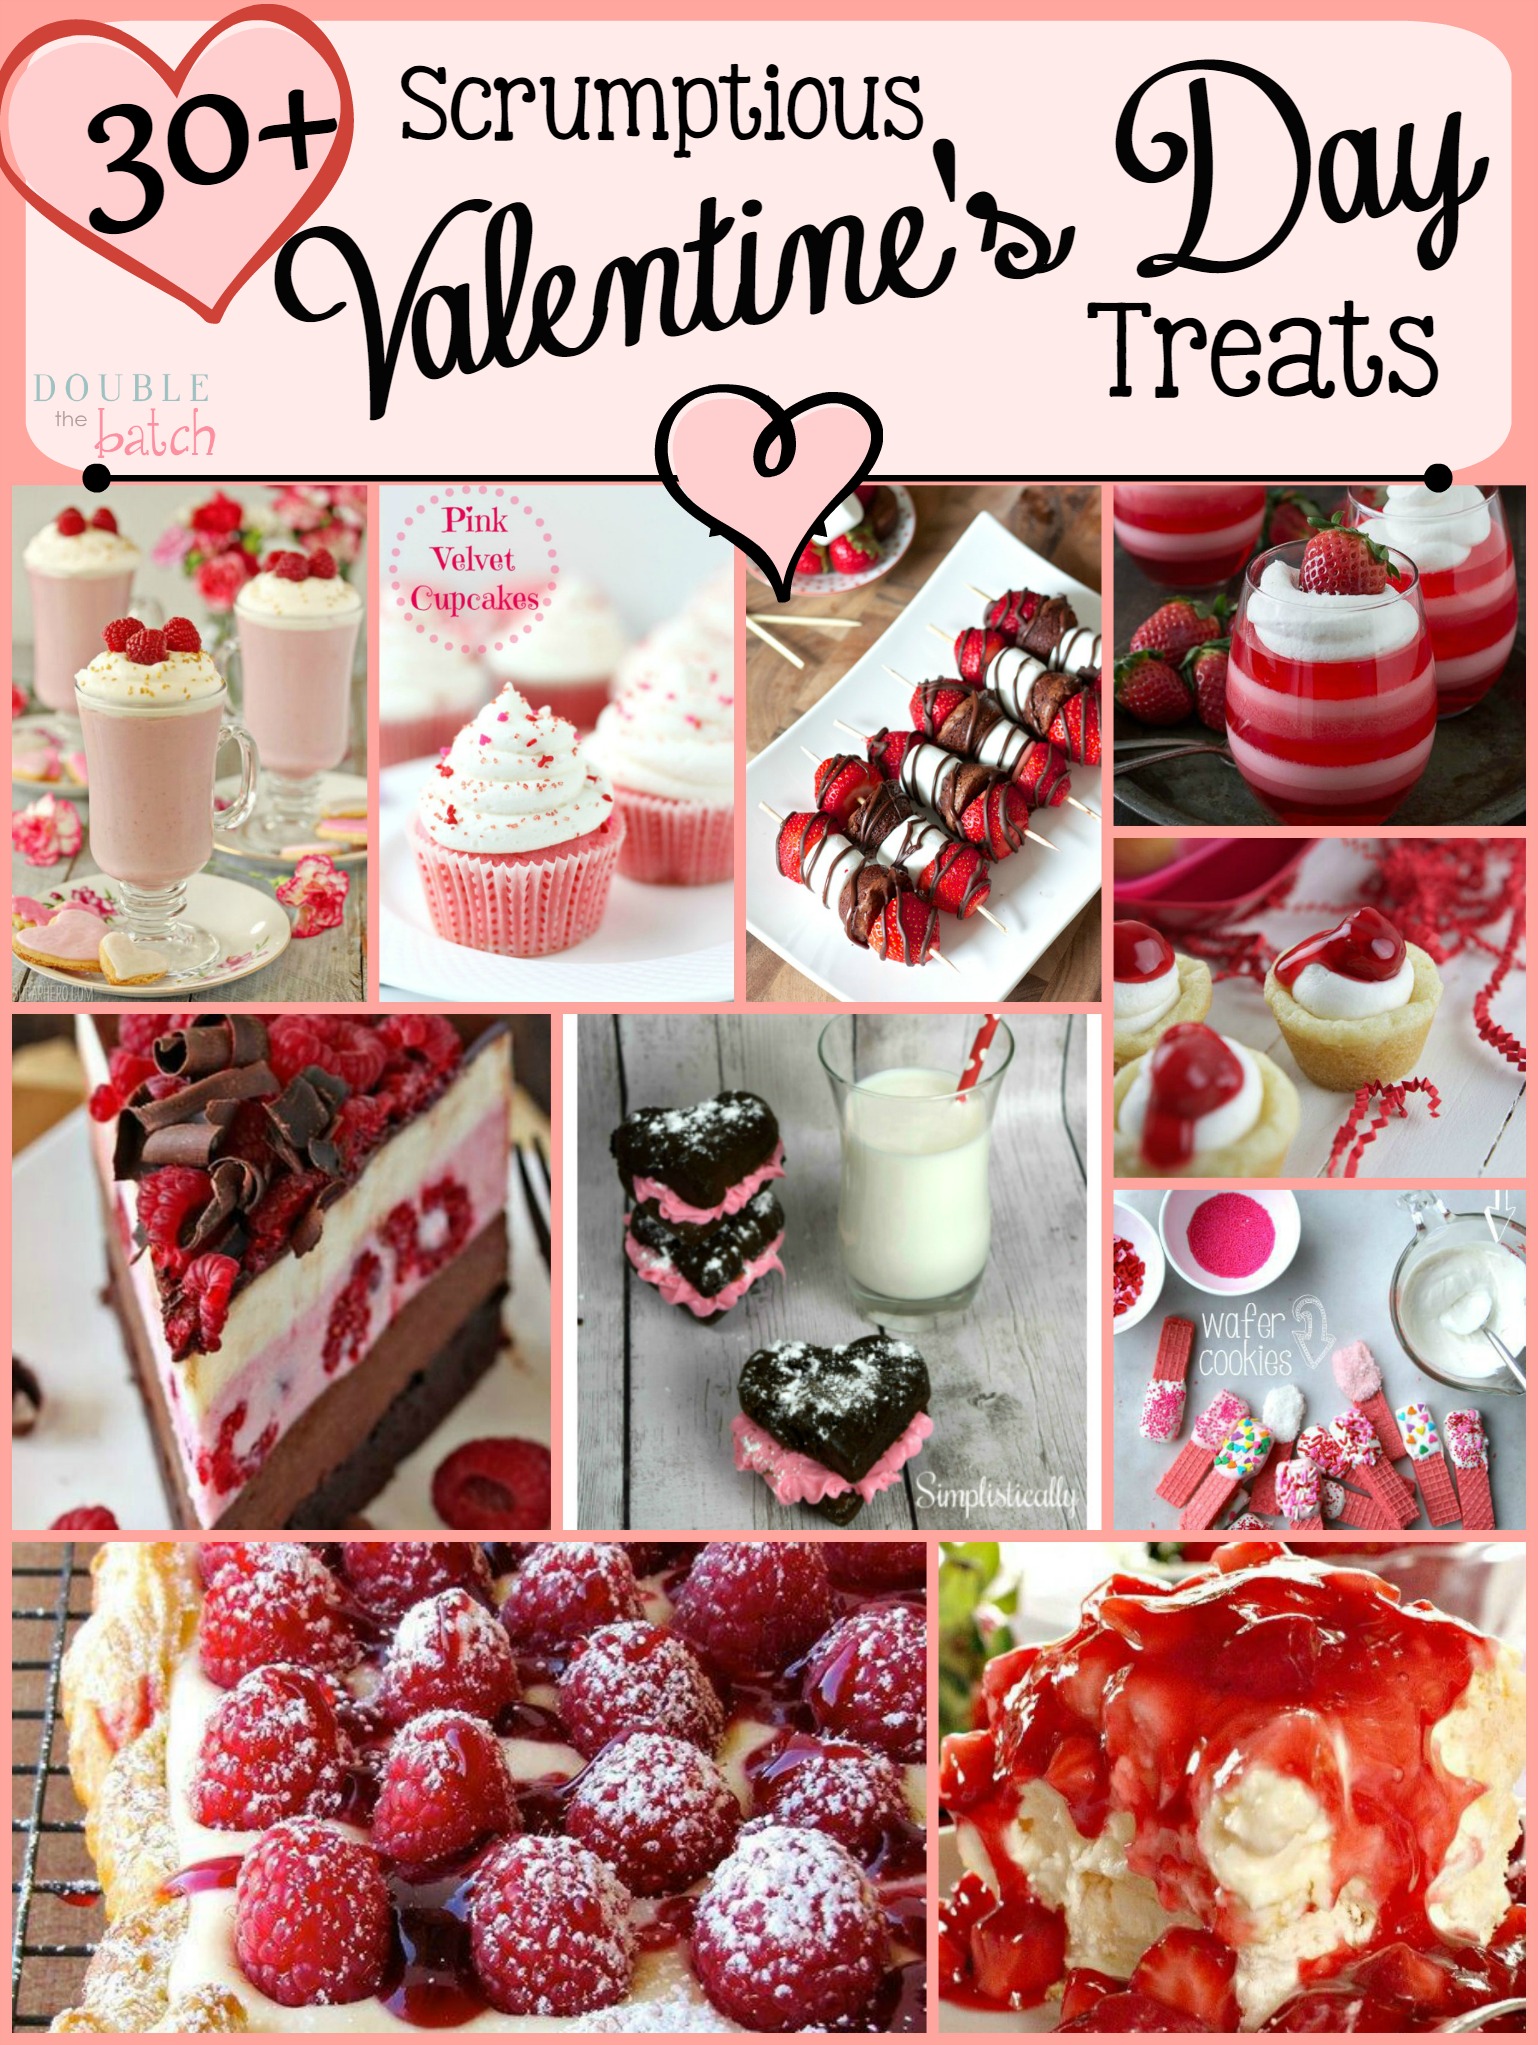 I'm drooling over all these amazing Valentine's Day Treats!